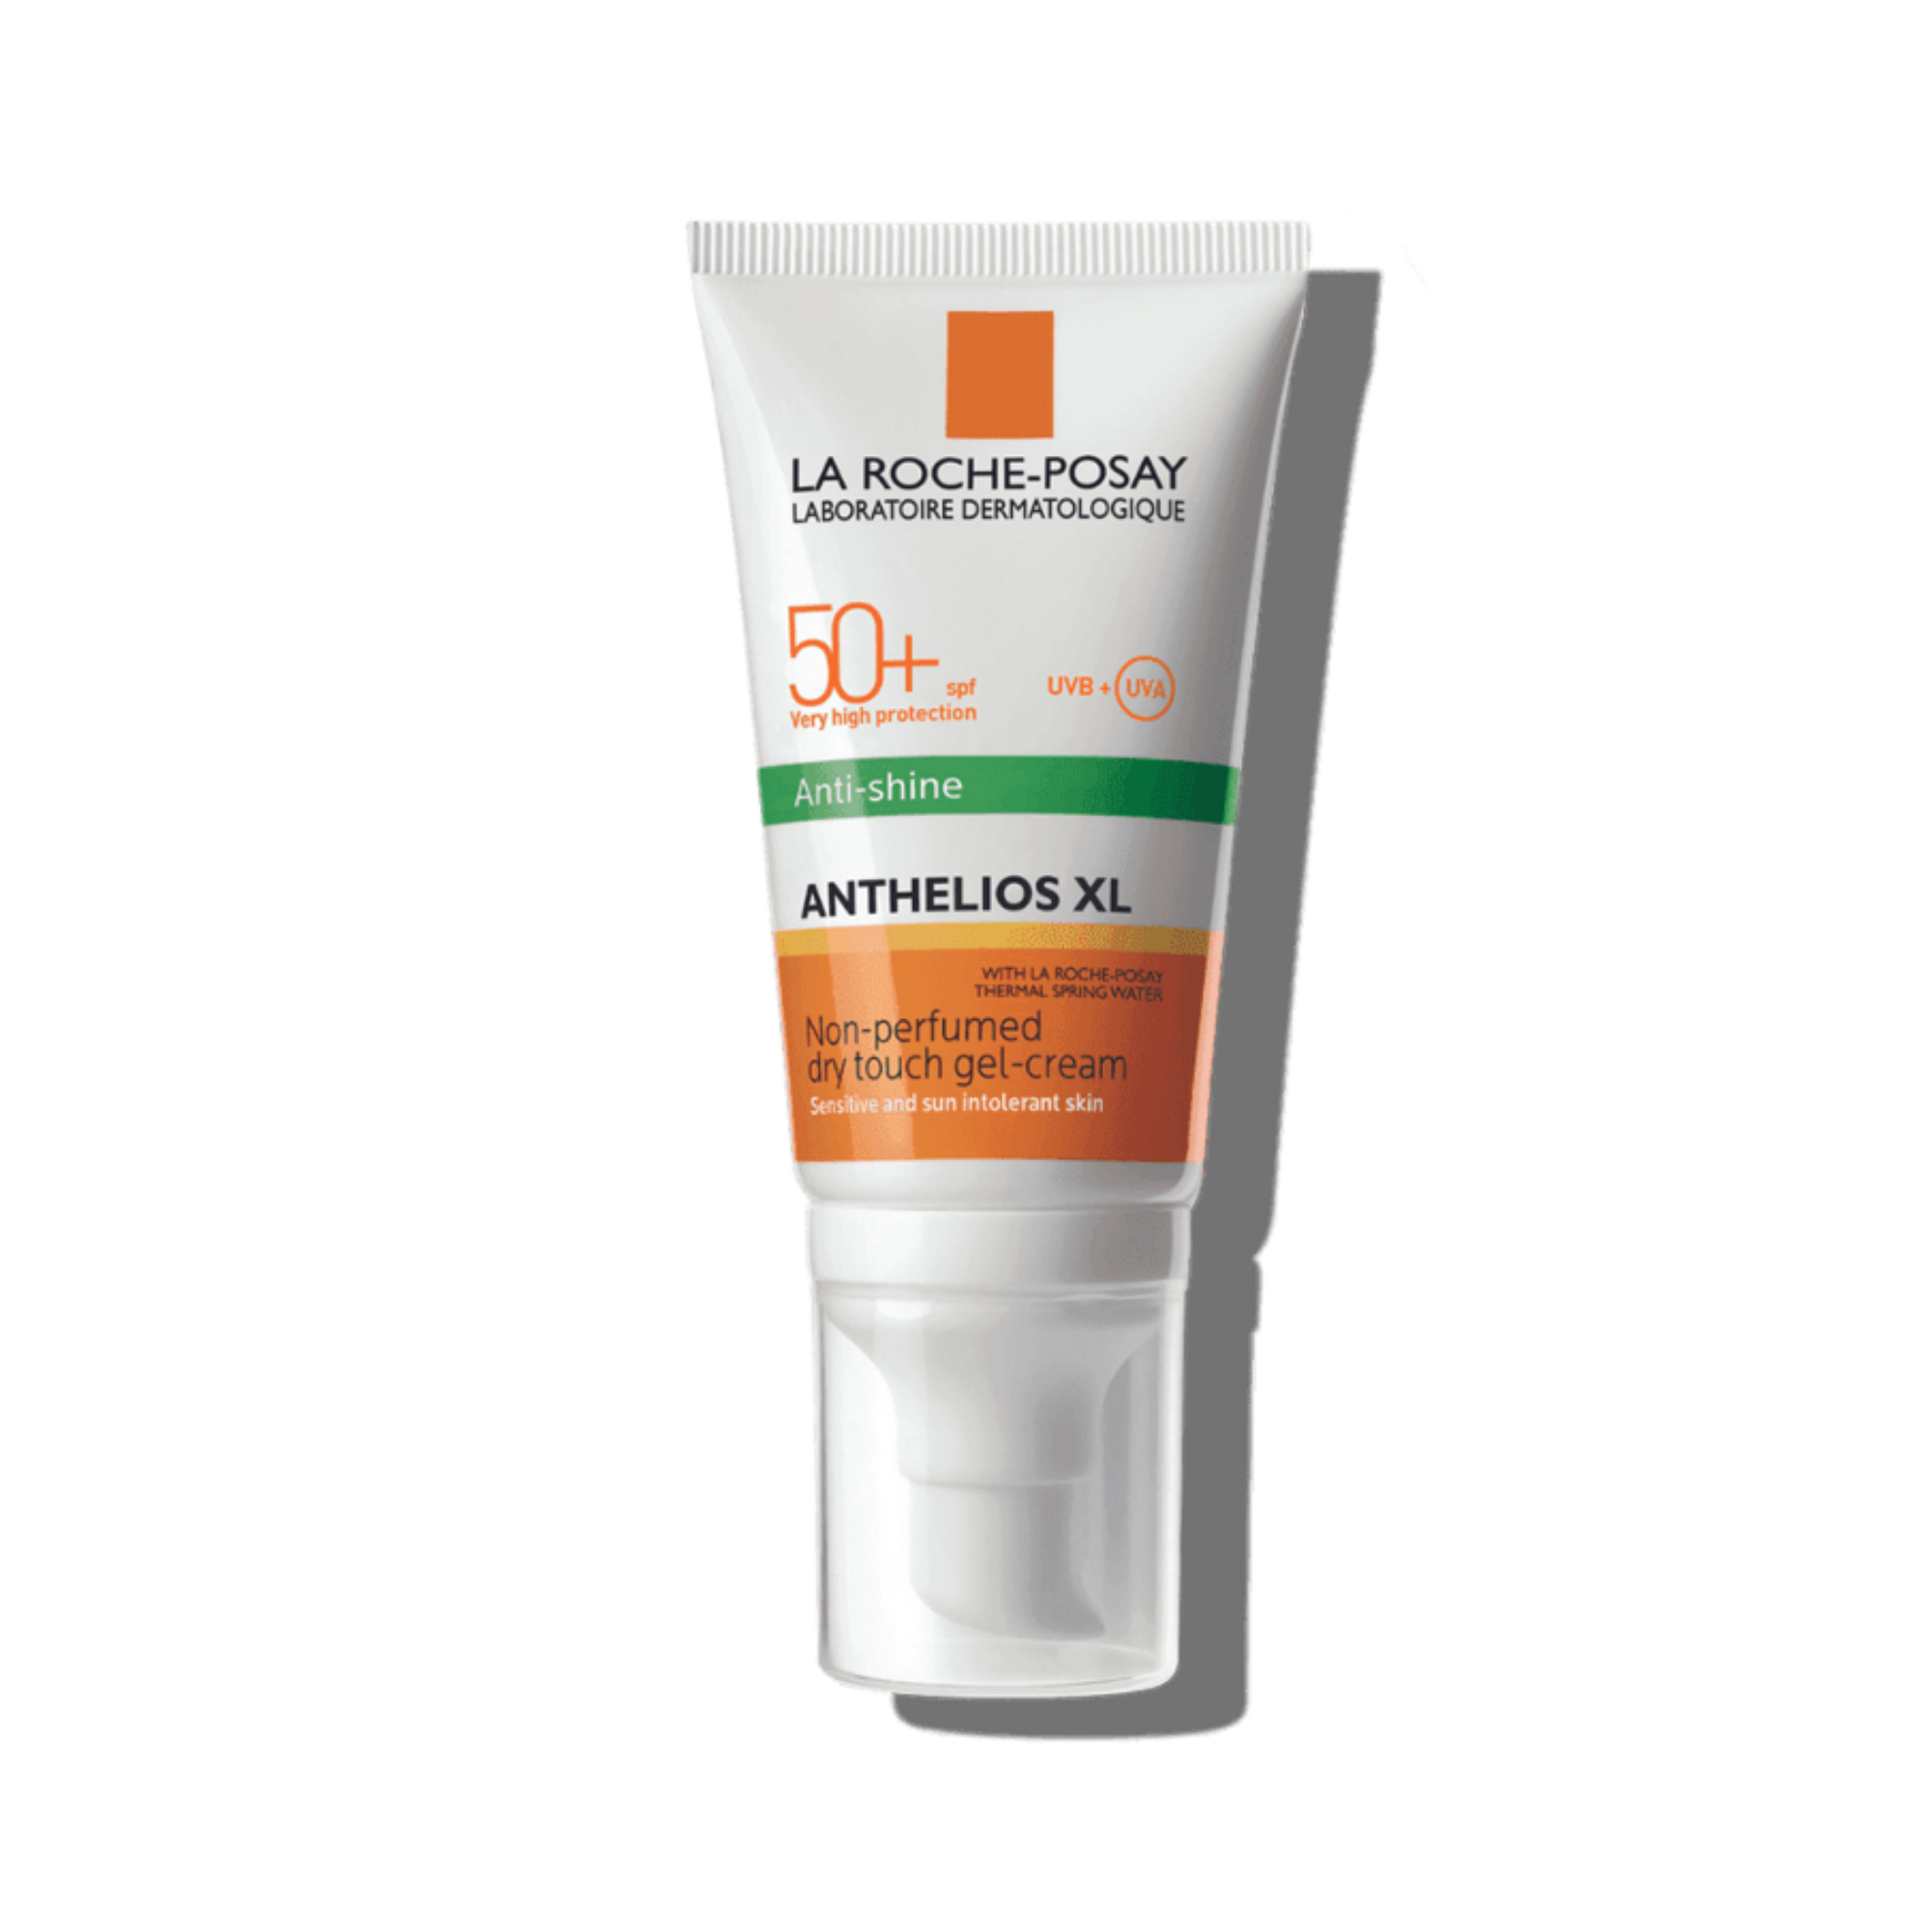 La Roche-Posay Anthelios ULTRA SPF50+ Face Sunscreen For Dry Skin 50ml